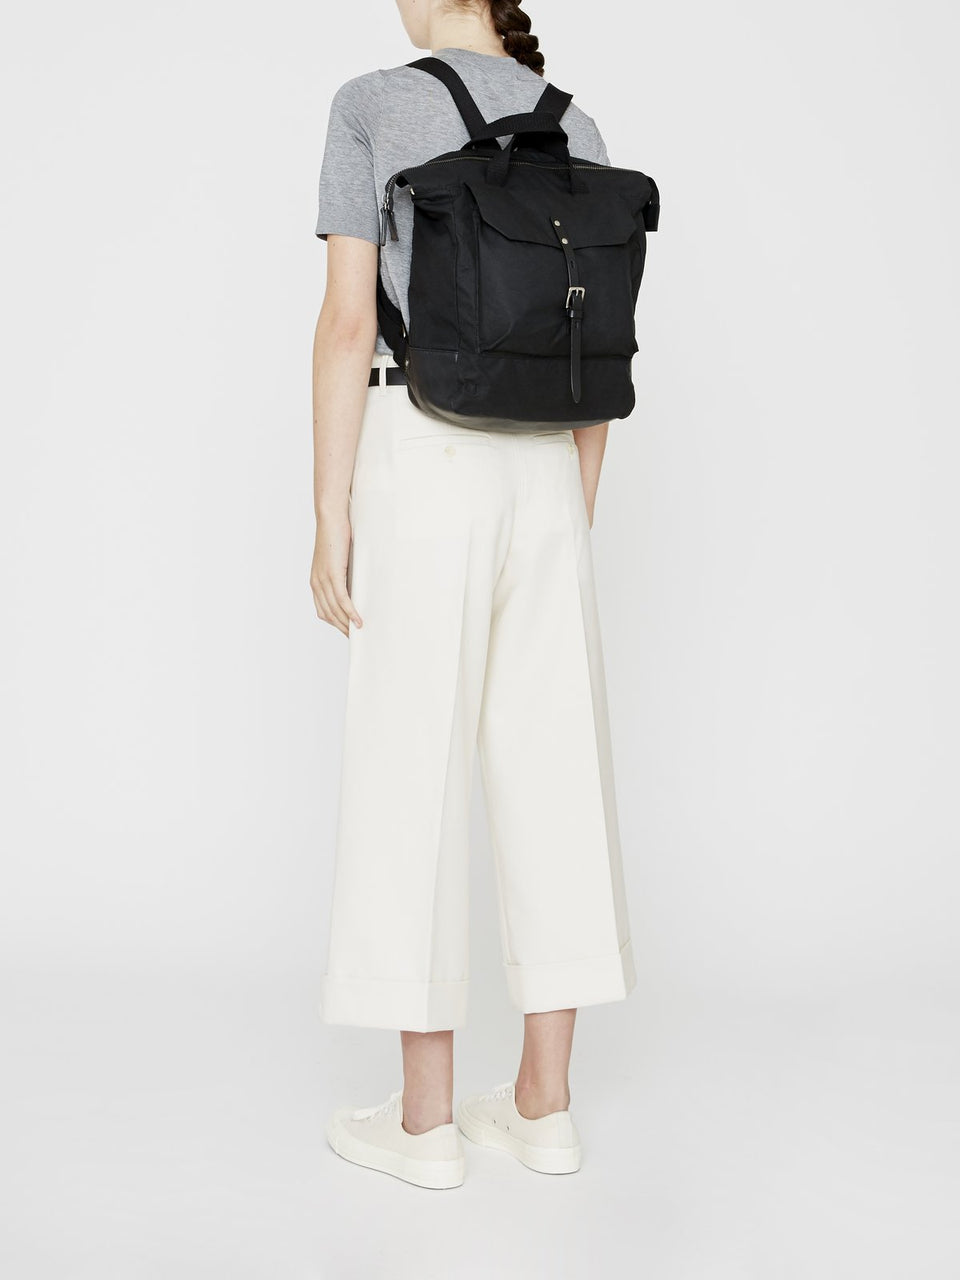 Frances Waxed Cotton Rucksack in Brick